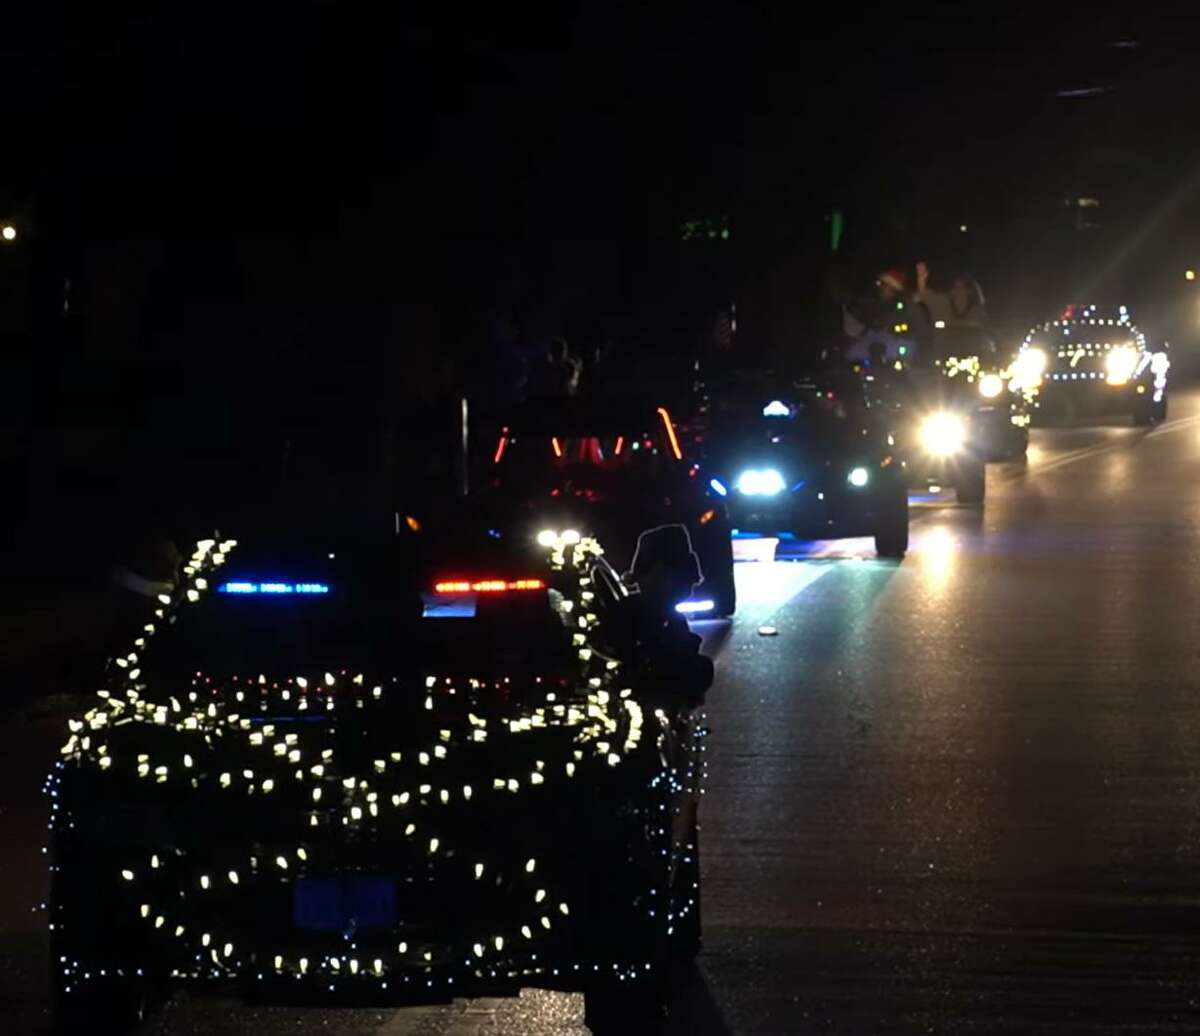 The 2022 Annual Twinkle Light Parade is scheduled to start at 6:30 p.m. Thursday in west Houston.